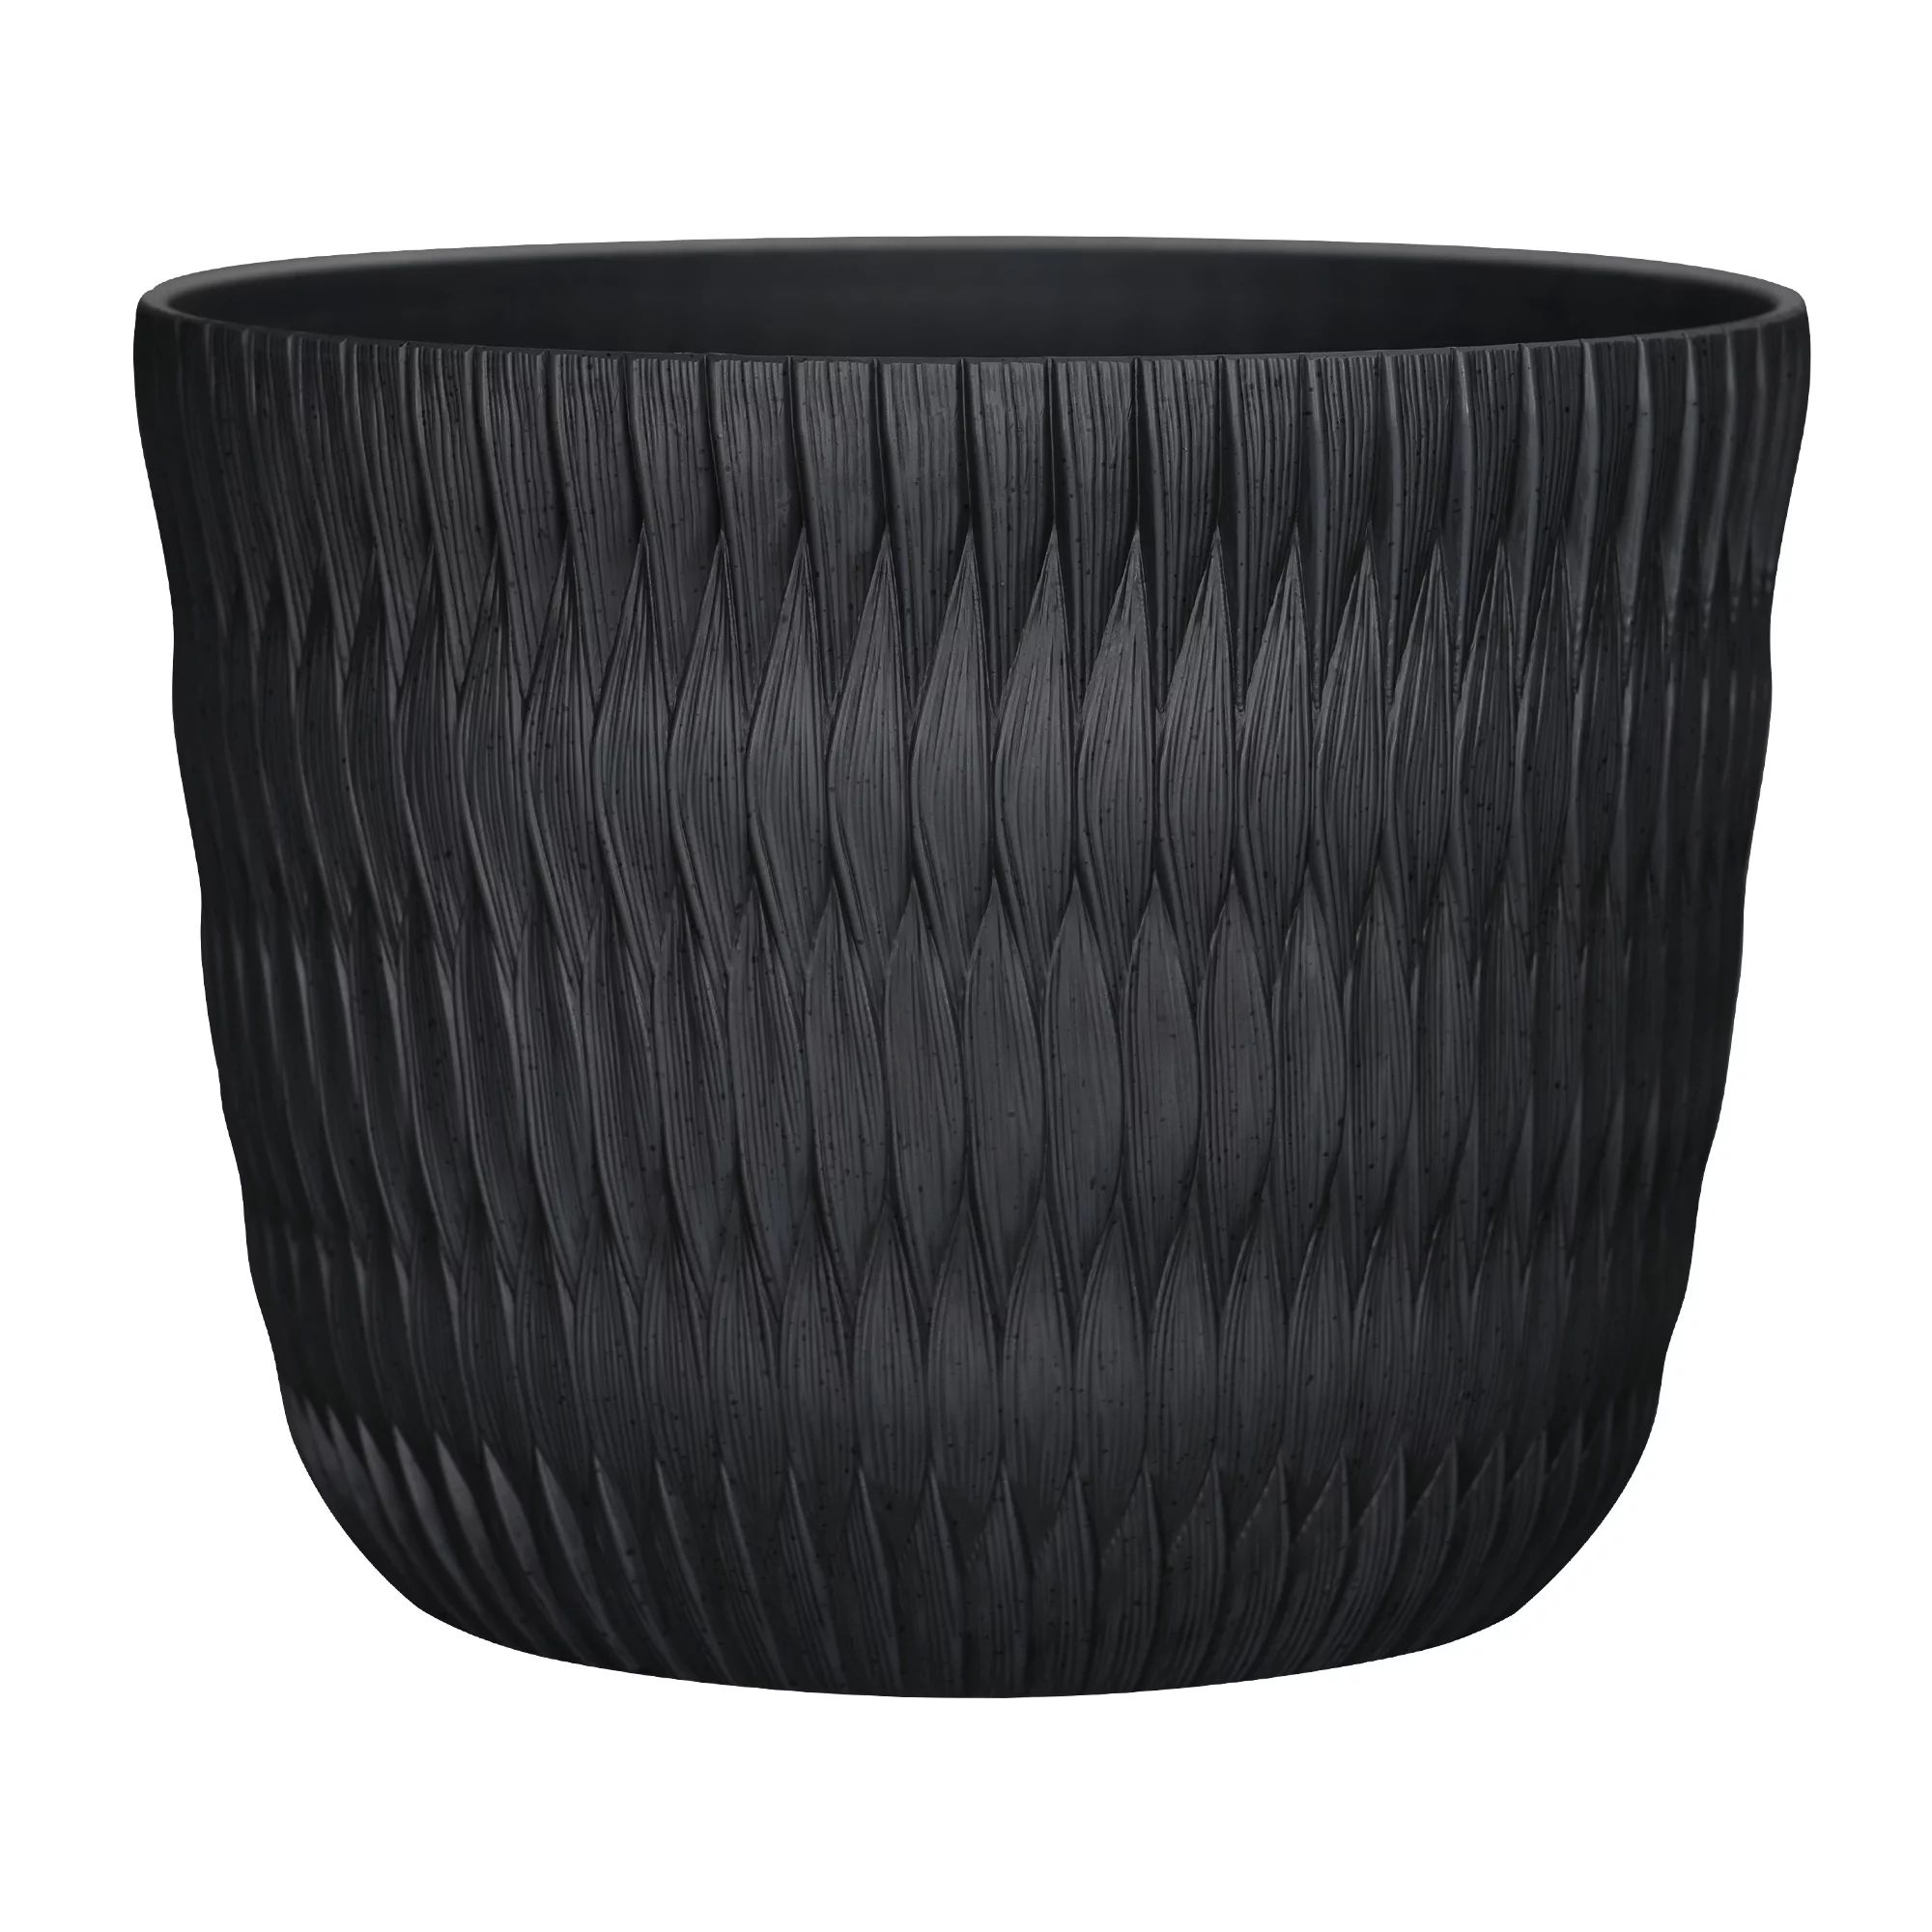 Better Homes & Gardens Carly Black Resin Planter, 15.9in x 15.9in x 12.5in | Walmart (US)